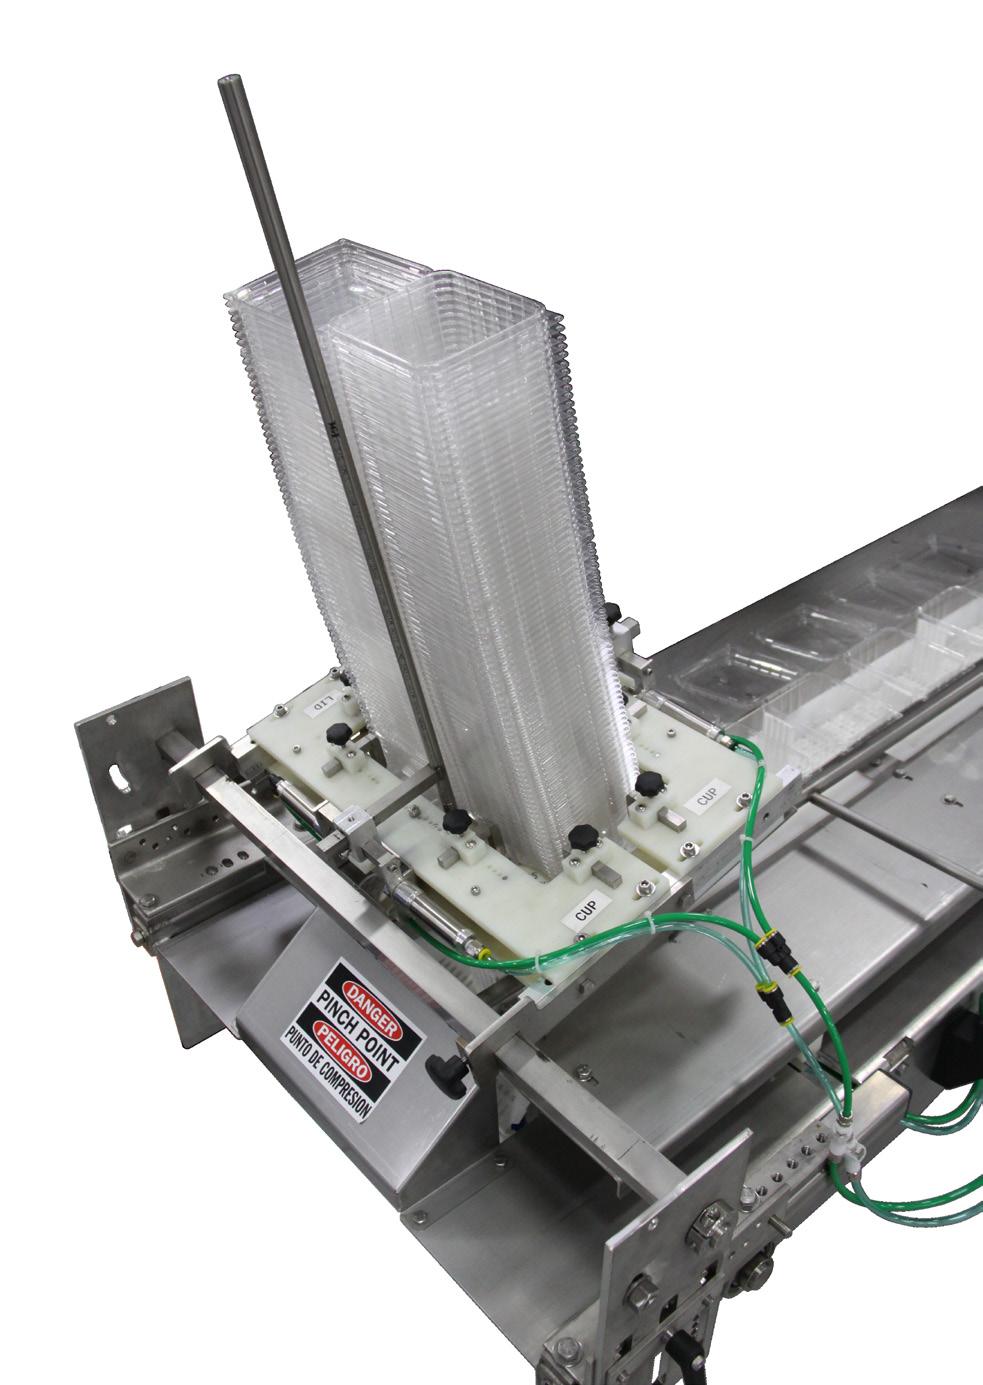 As the hopper eye (included) mounted on your filler s hopper recognizes berries and a need for containers below, the denester simply flicks the container down onto the conveyor.